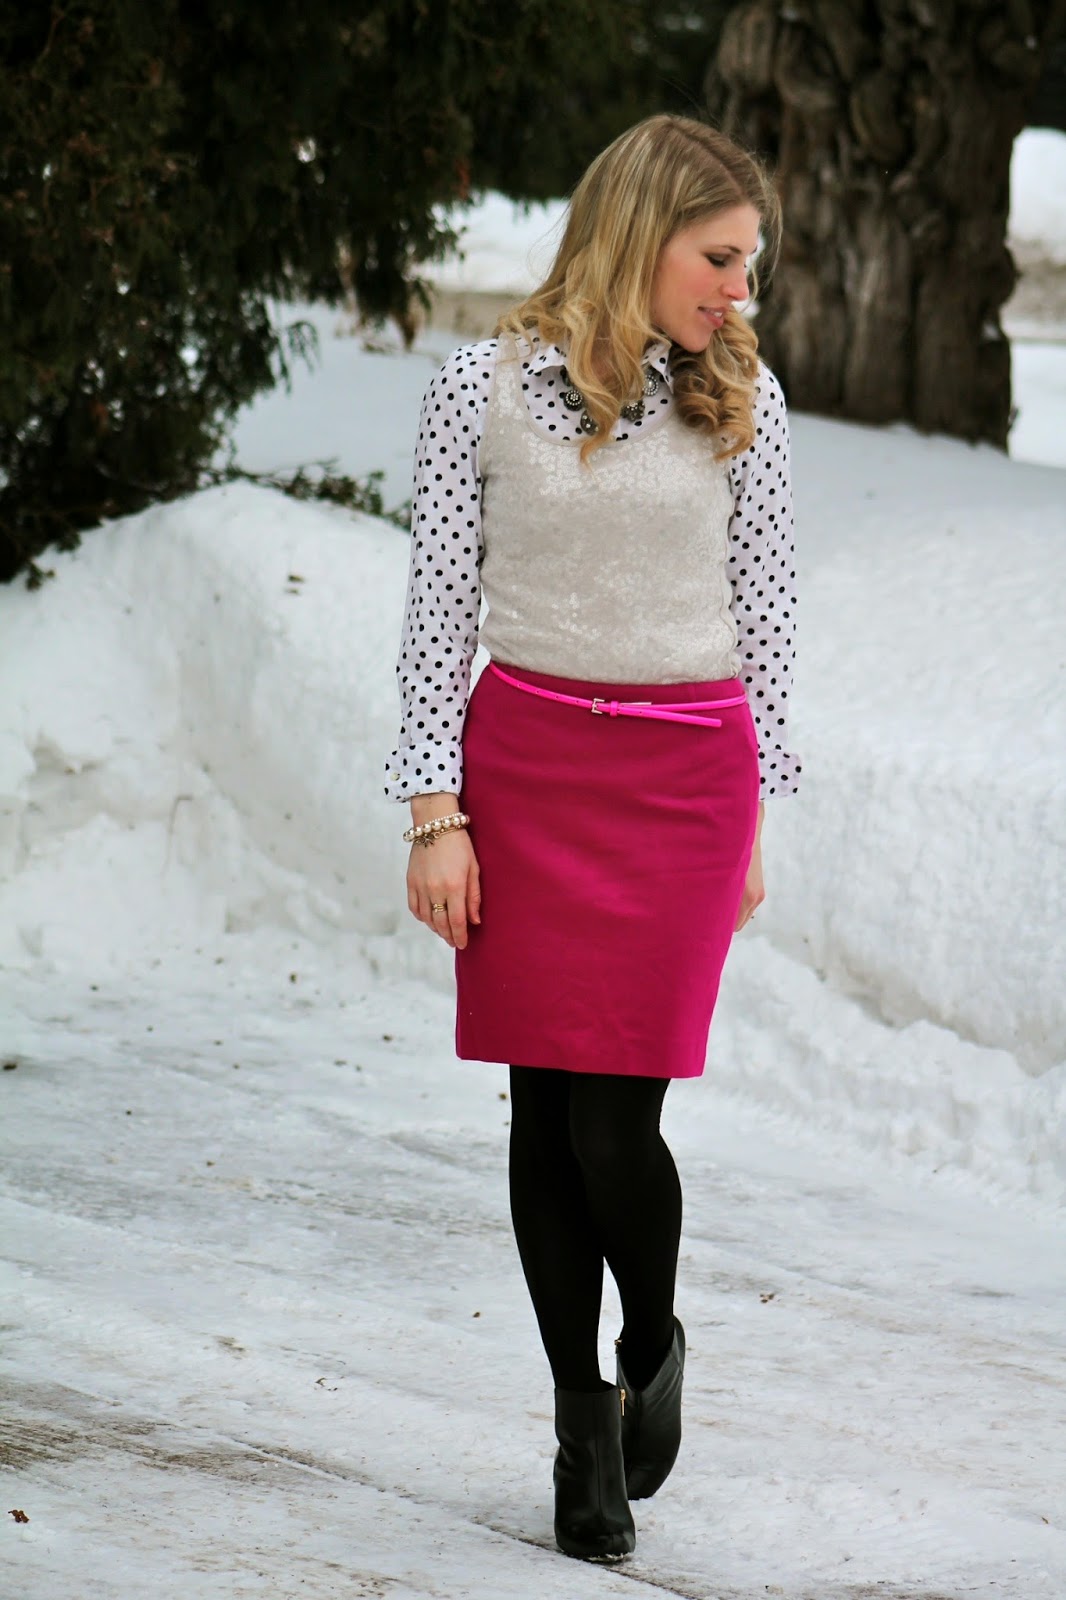 Valentine's Day with Pink, Polka Dots, and Sequins!